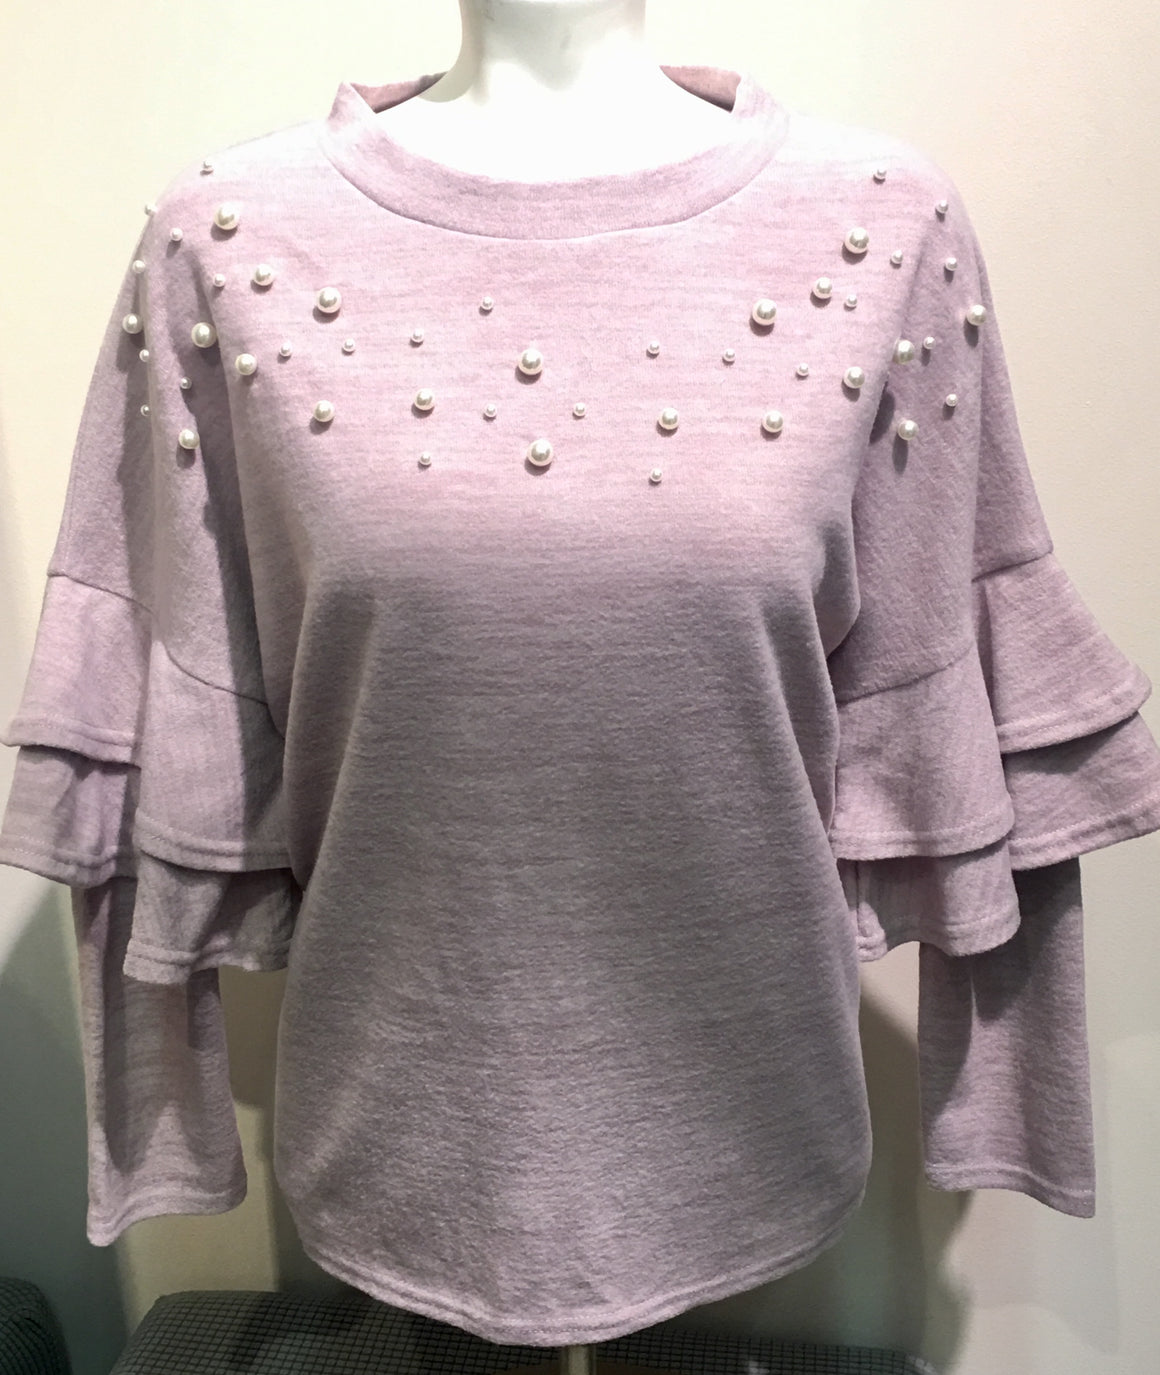 Double Ruffled Knit Top W/Pearls